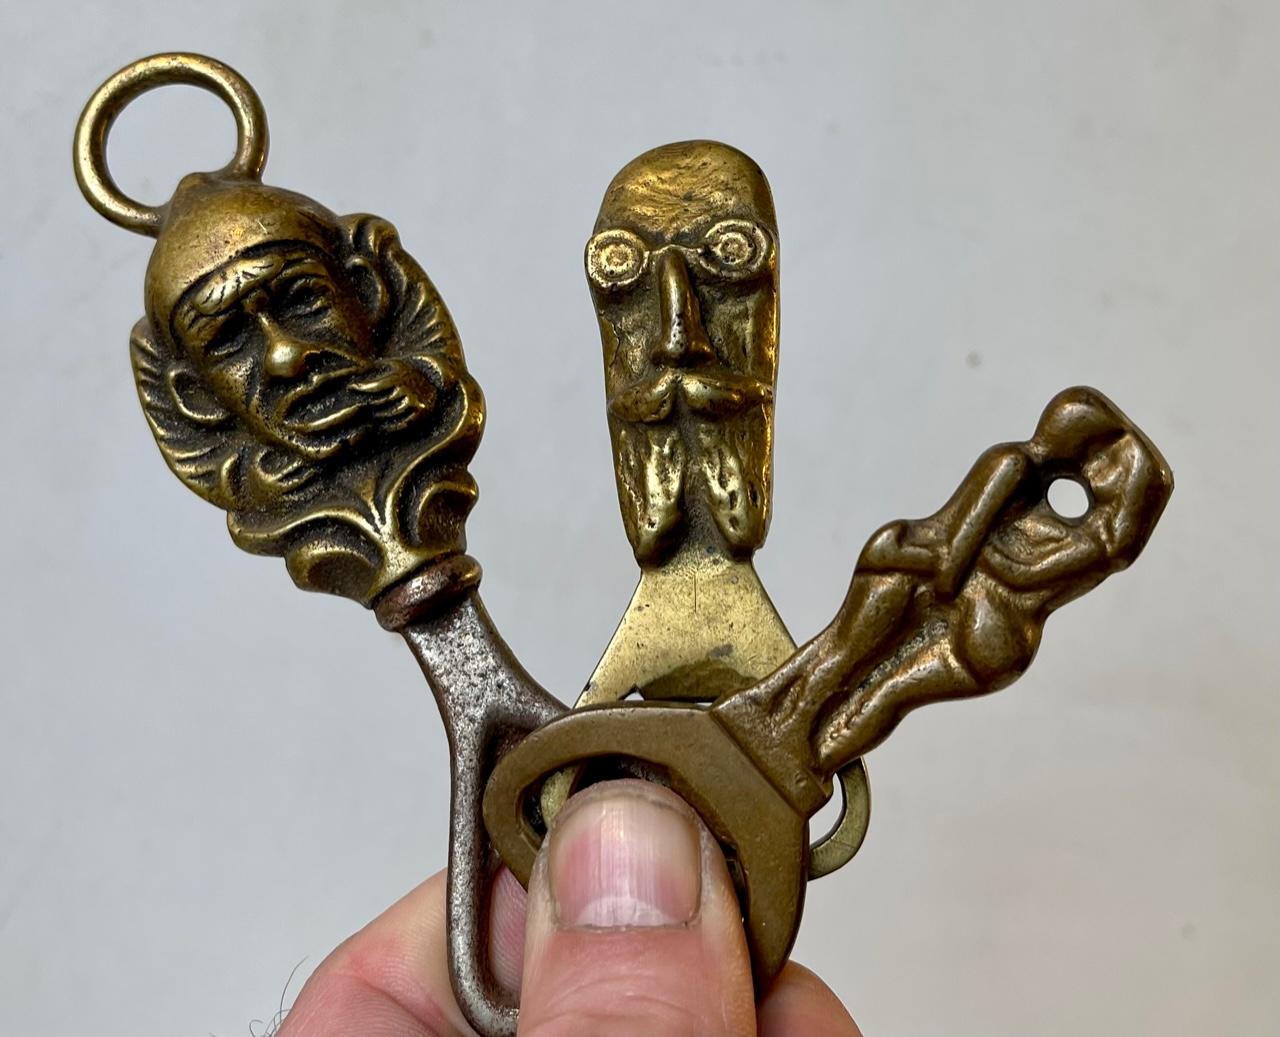 Characterfull lot of 3 bottle openers. One of an elderly man with glasses, one with a court jester and one with an erotic depiction. Measurements: H: 12, 8.5, 8,5 cm.